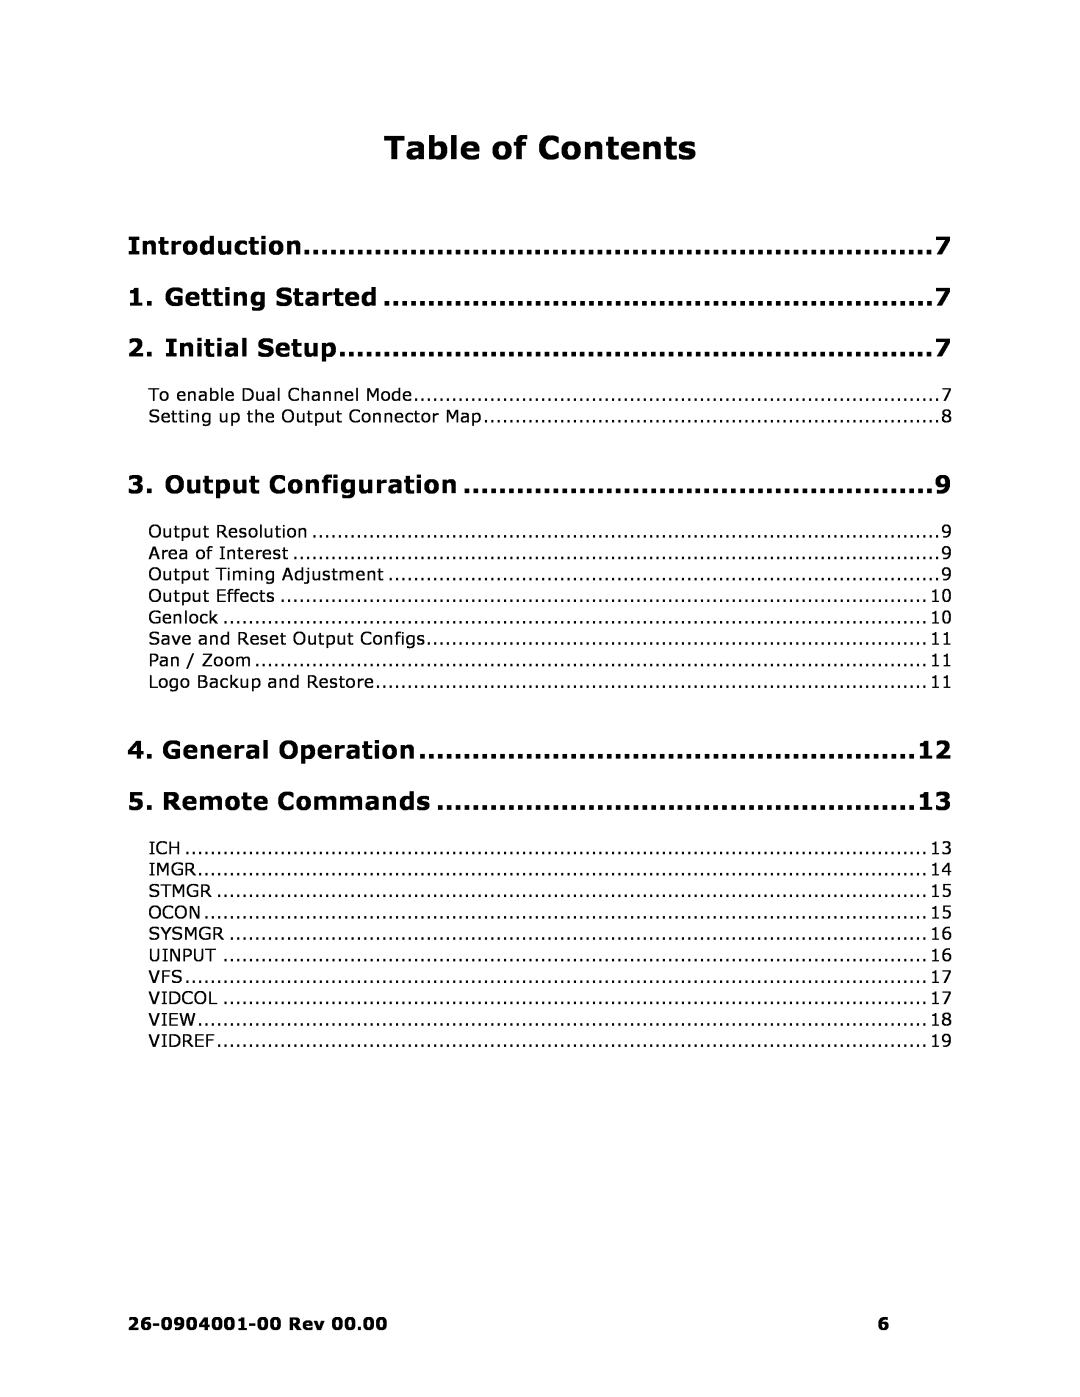 Barco II manual Table of Contents, Introduction, Getting Started, Initial Setup, Output Configuration, General Operation 